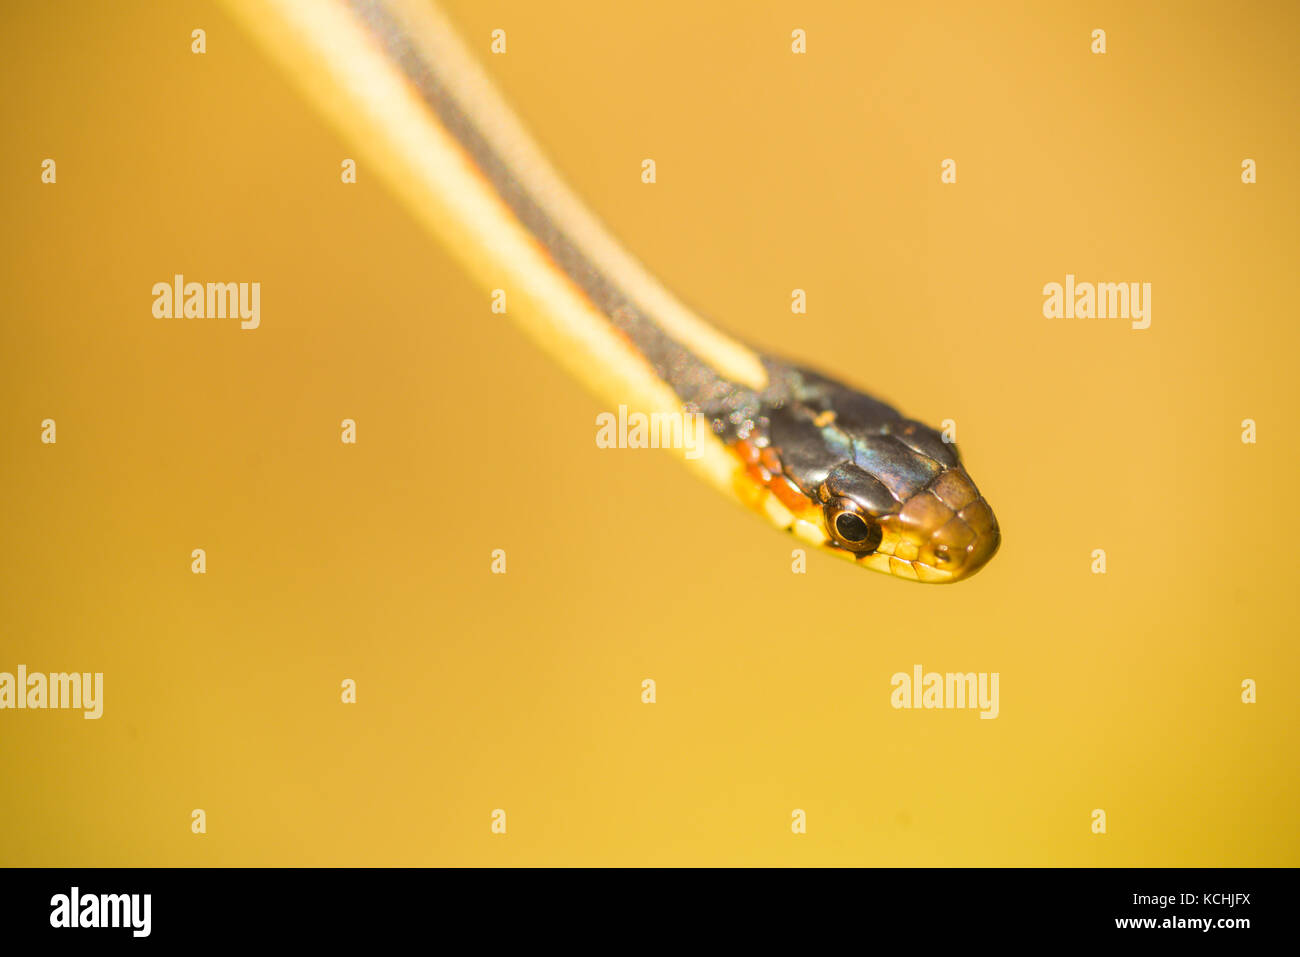 A garter snake up close with a yellow background Stock Photo